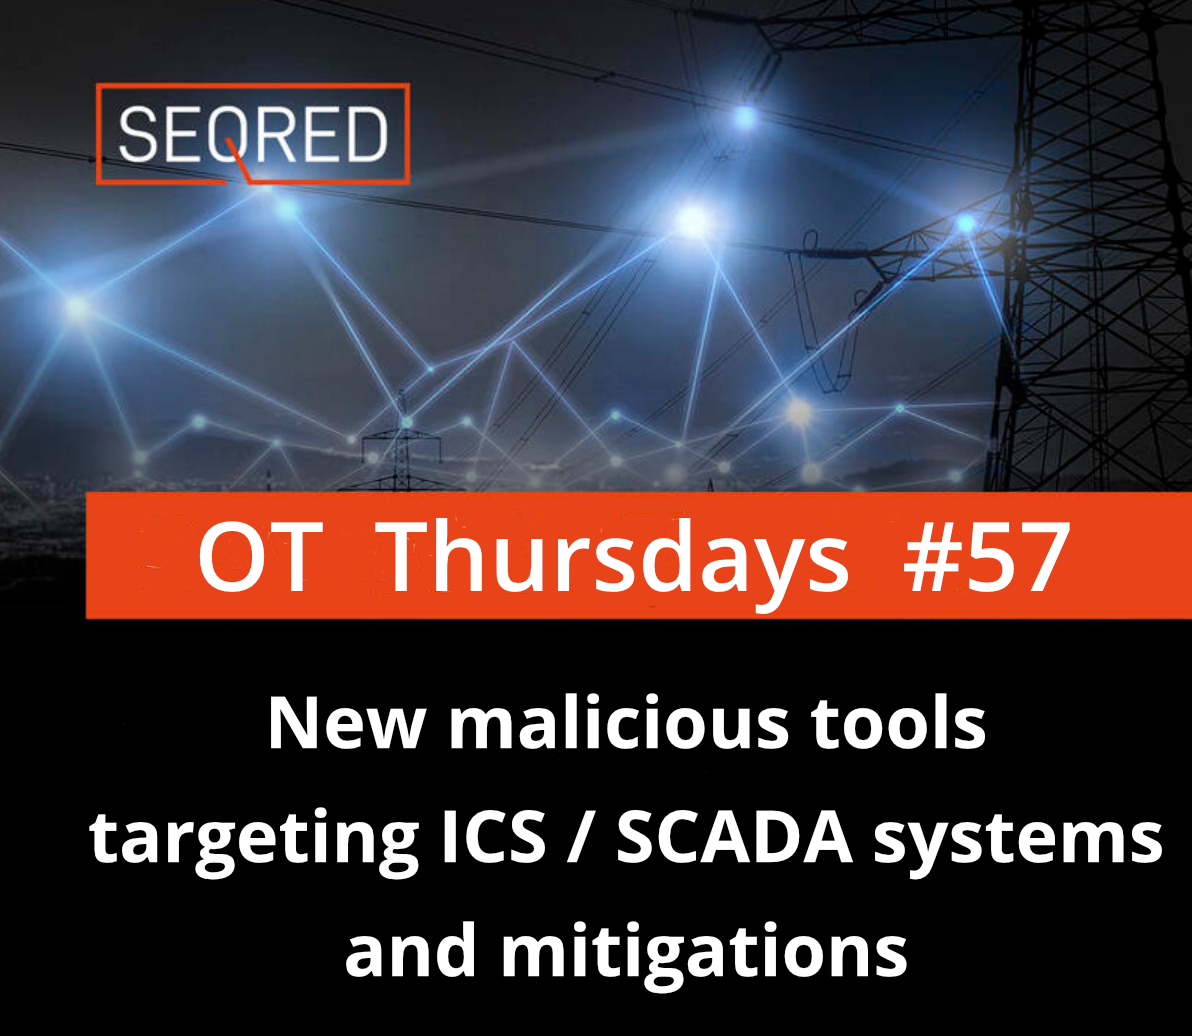 New malicious tools targeting ICS / SCADA systems and mitigations